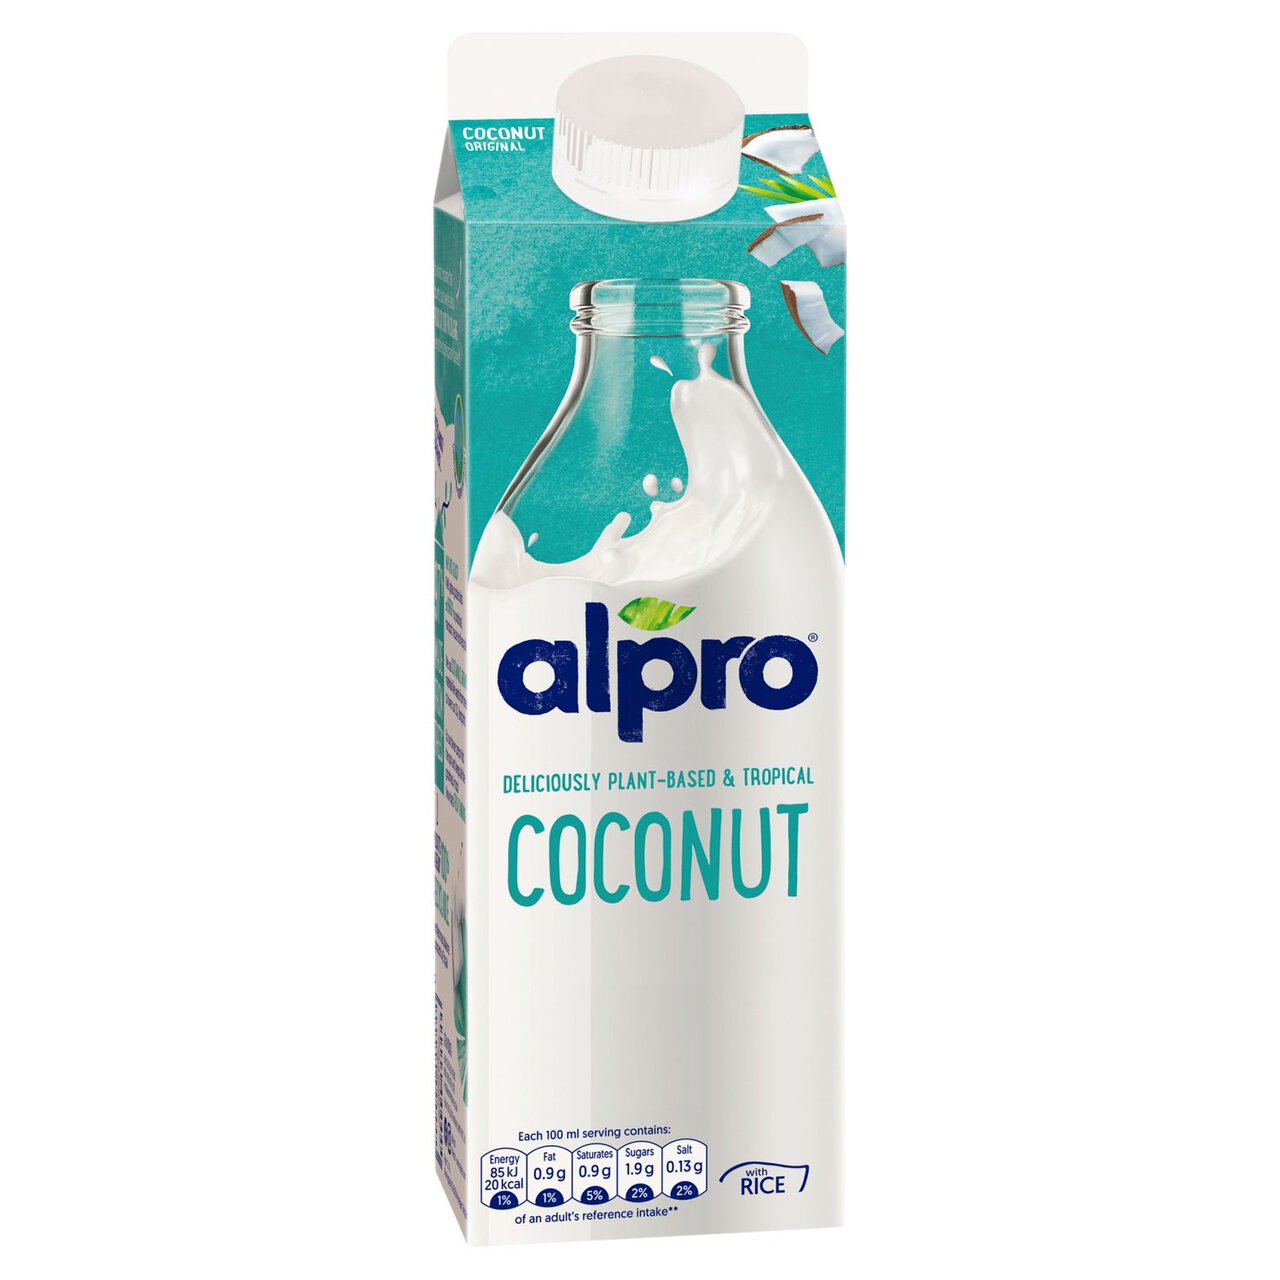 Alpro Coconut Chilled Drink 1l